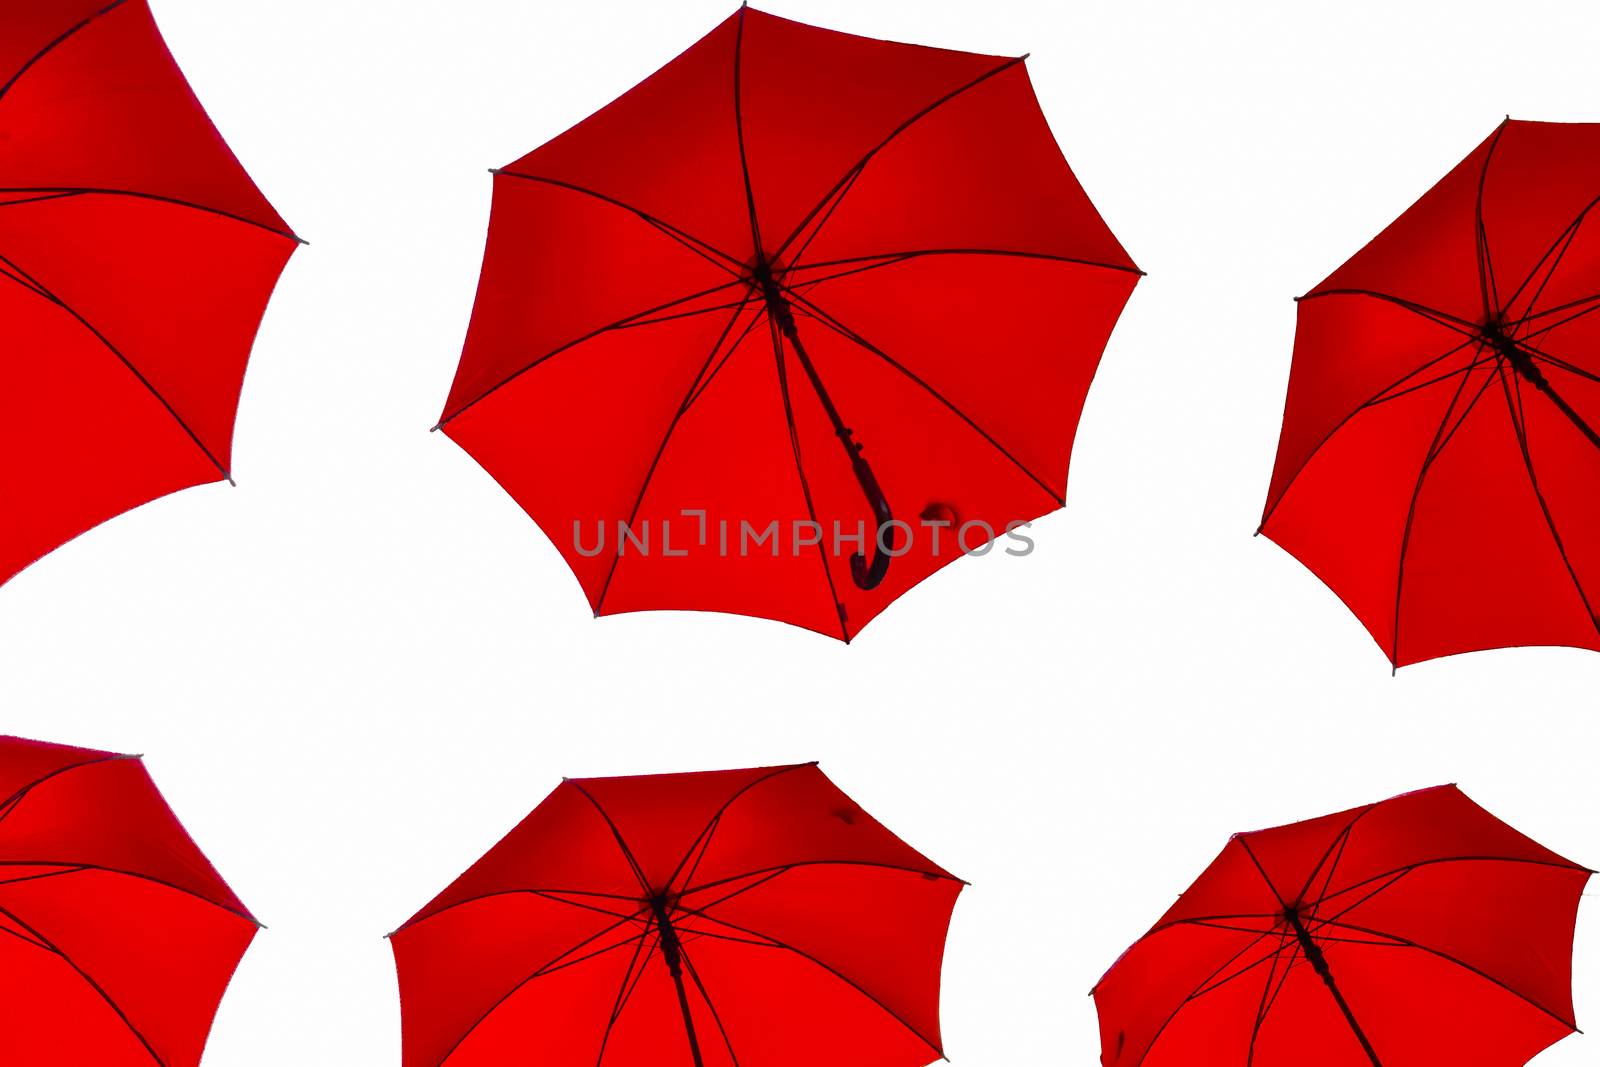 Red umbrellas on isolated on white by asafaric